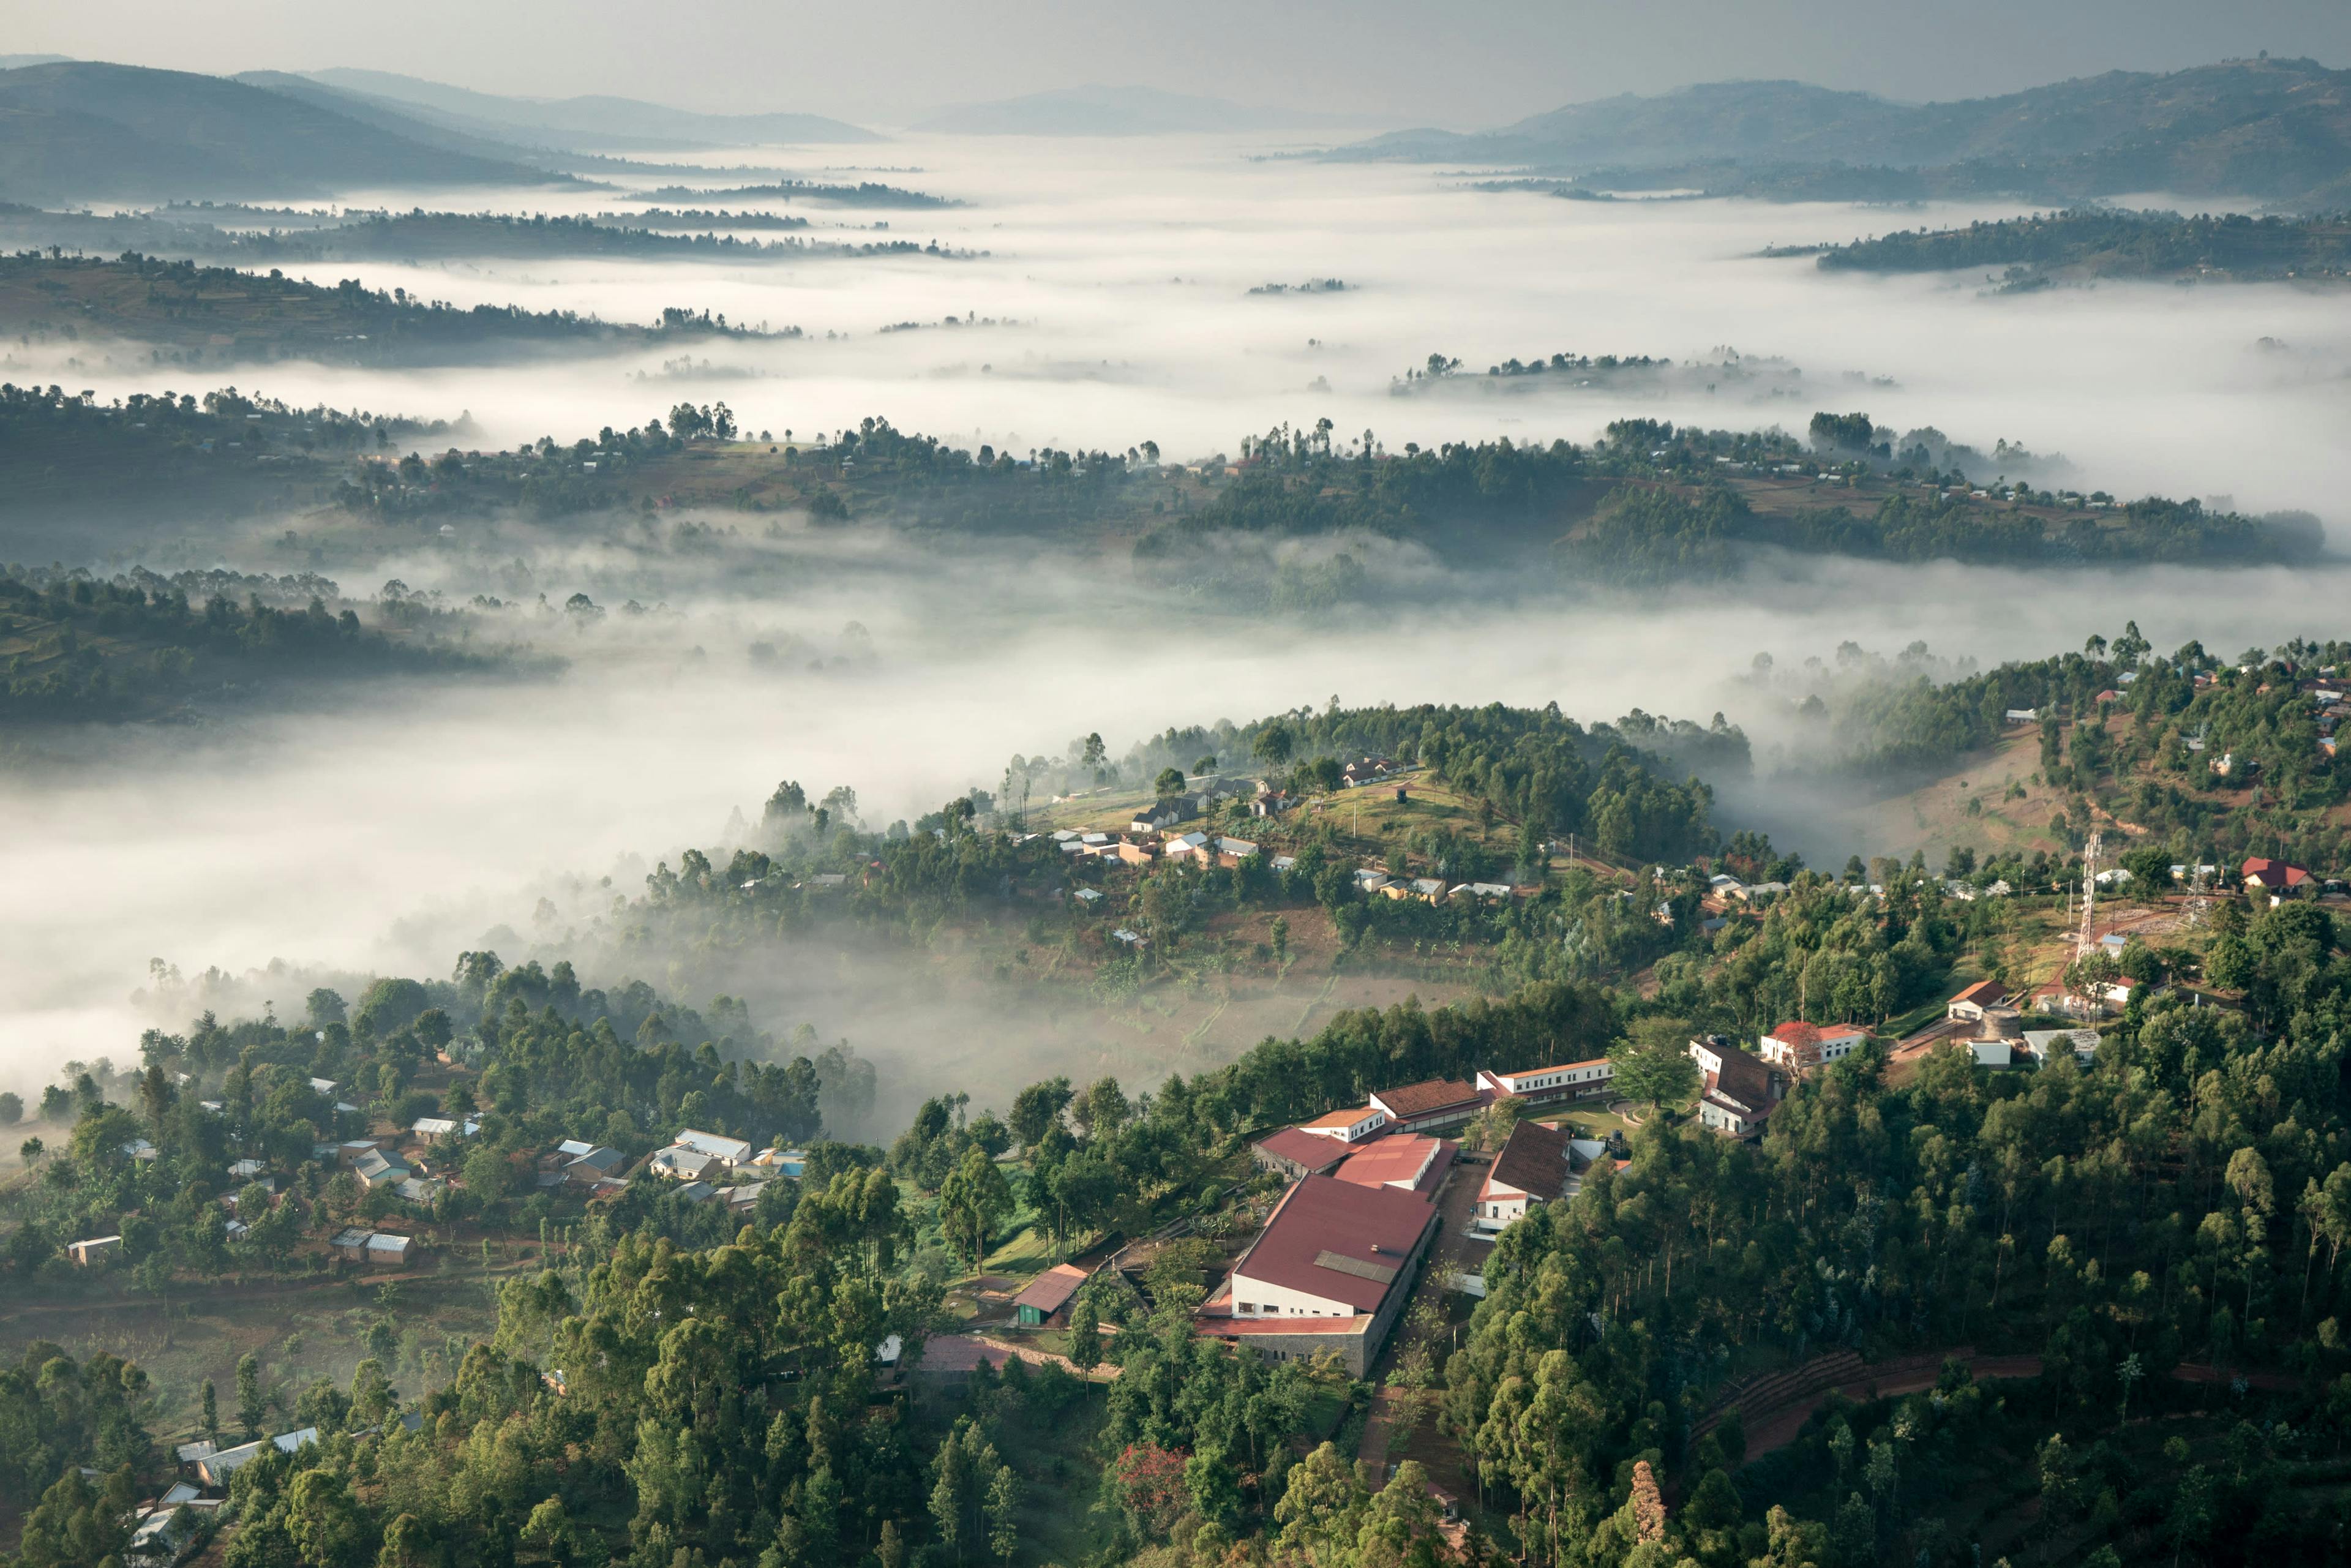 A view from the sky down overlooking a lush valley with a marine layer and buildings.